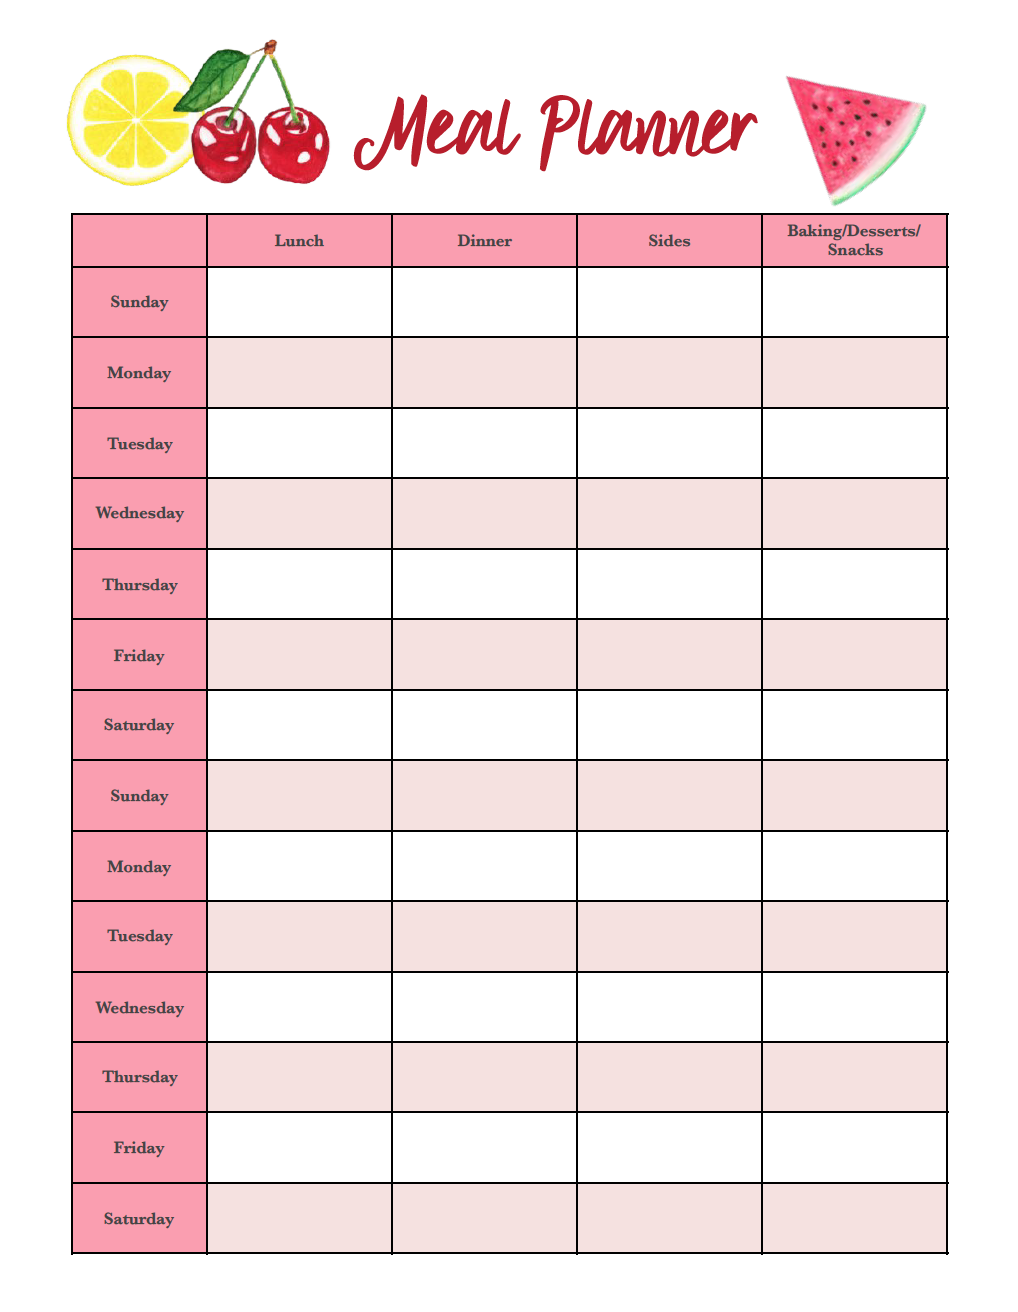 printables-the-road-to-loving-my-thermo-mixer-free-meal-planning-45